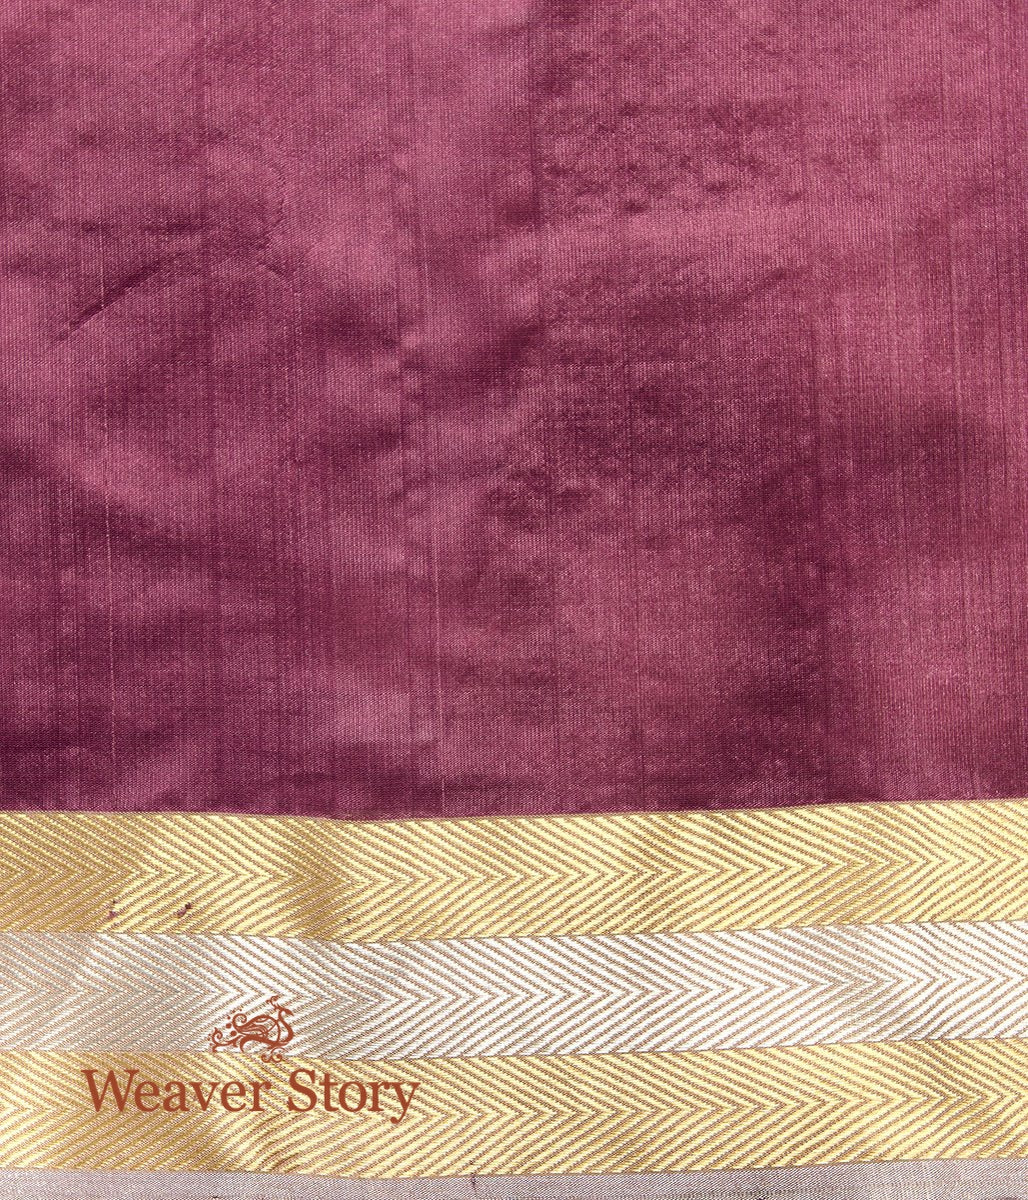 Handwoven_Wine_Floral_Boota_Saree_with_Gold_Silver_Chevron_Border_WeaverStory_05